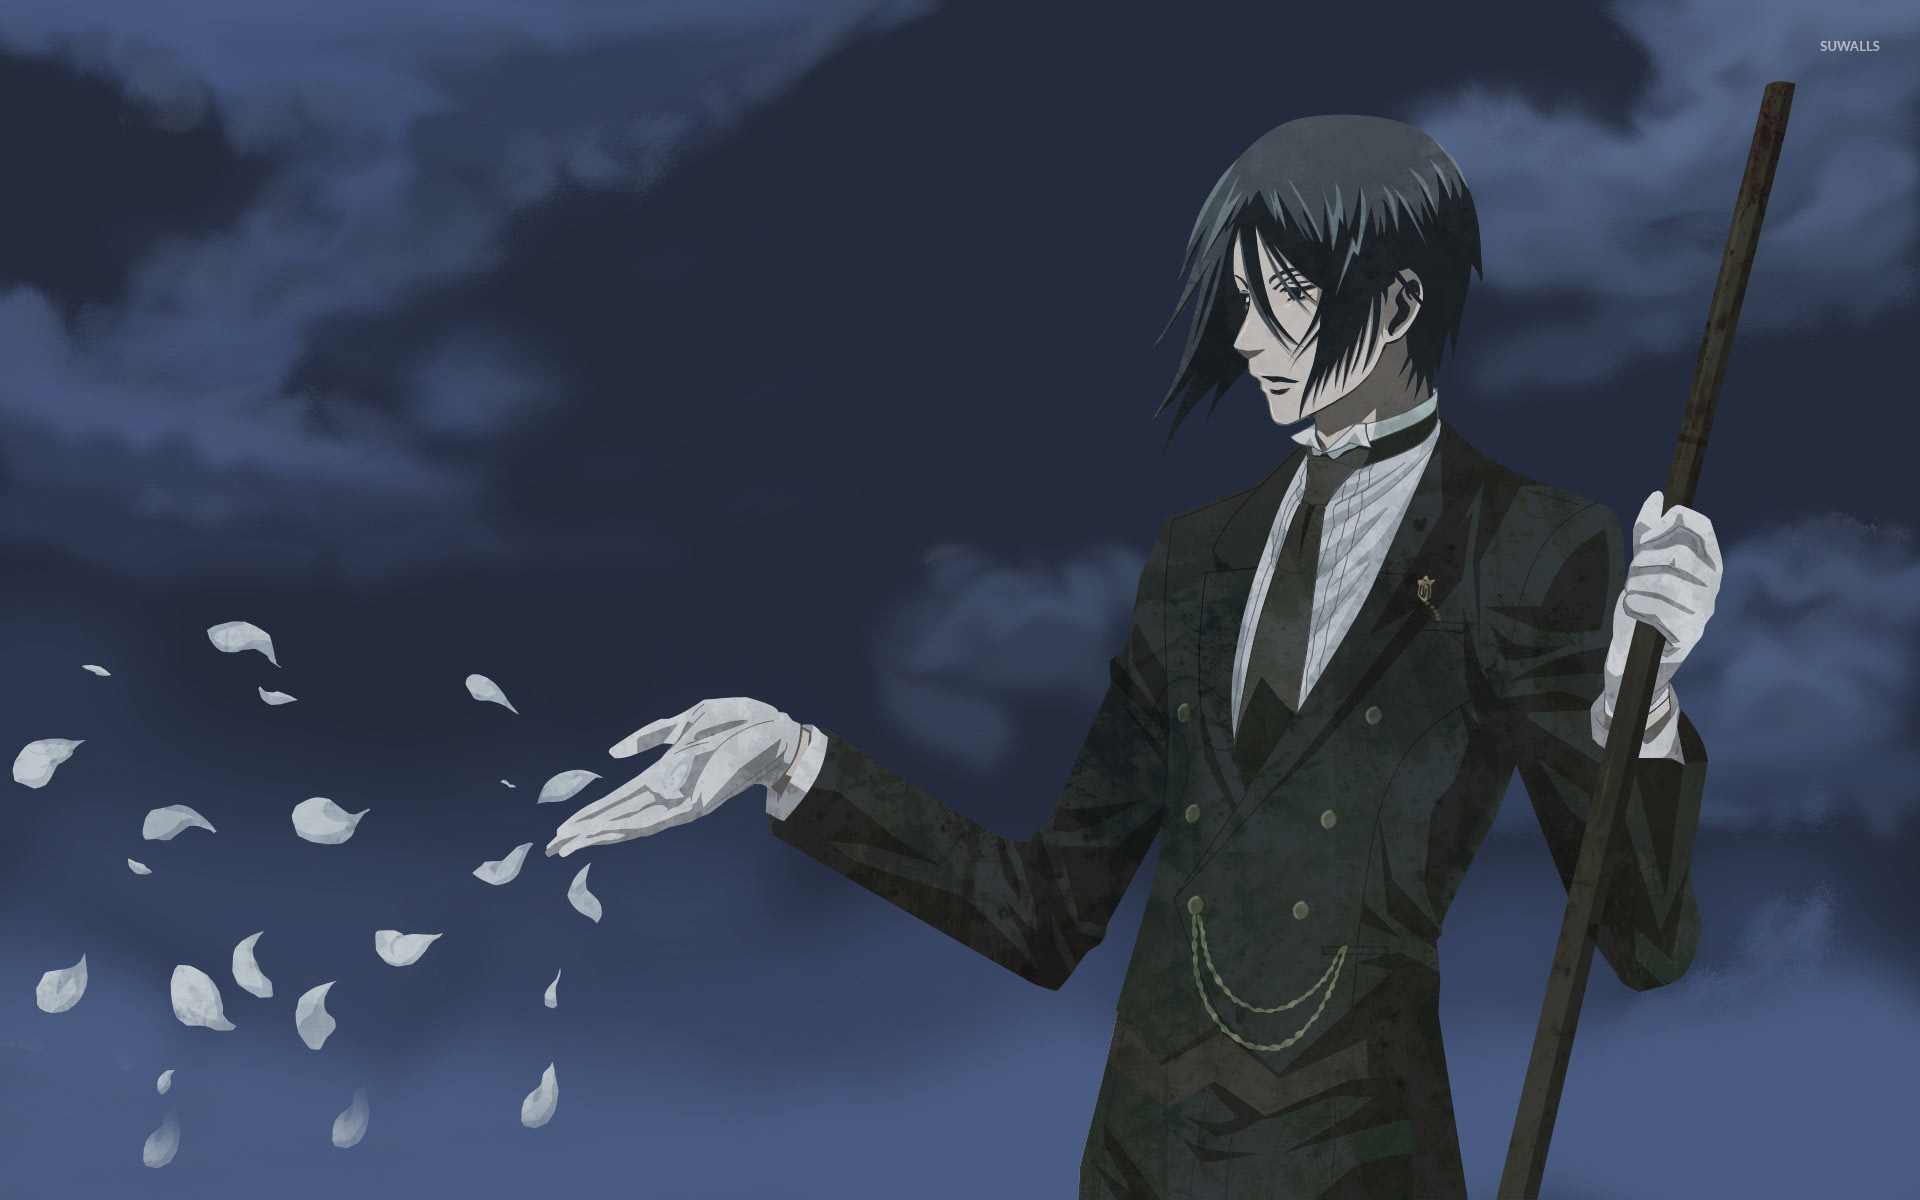 1920x1200 1925x1205 ... who update their black butler backgrounds on a regular  interval of time. we at picsbroker.com always share black butler backgrounds  Nature ...